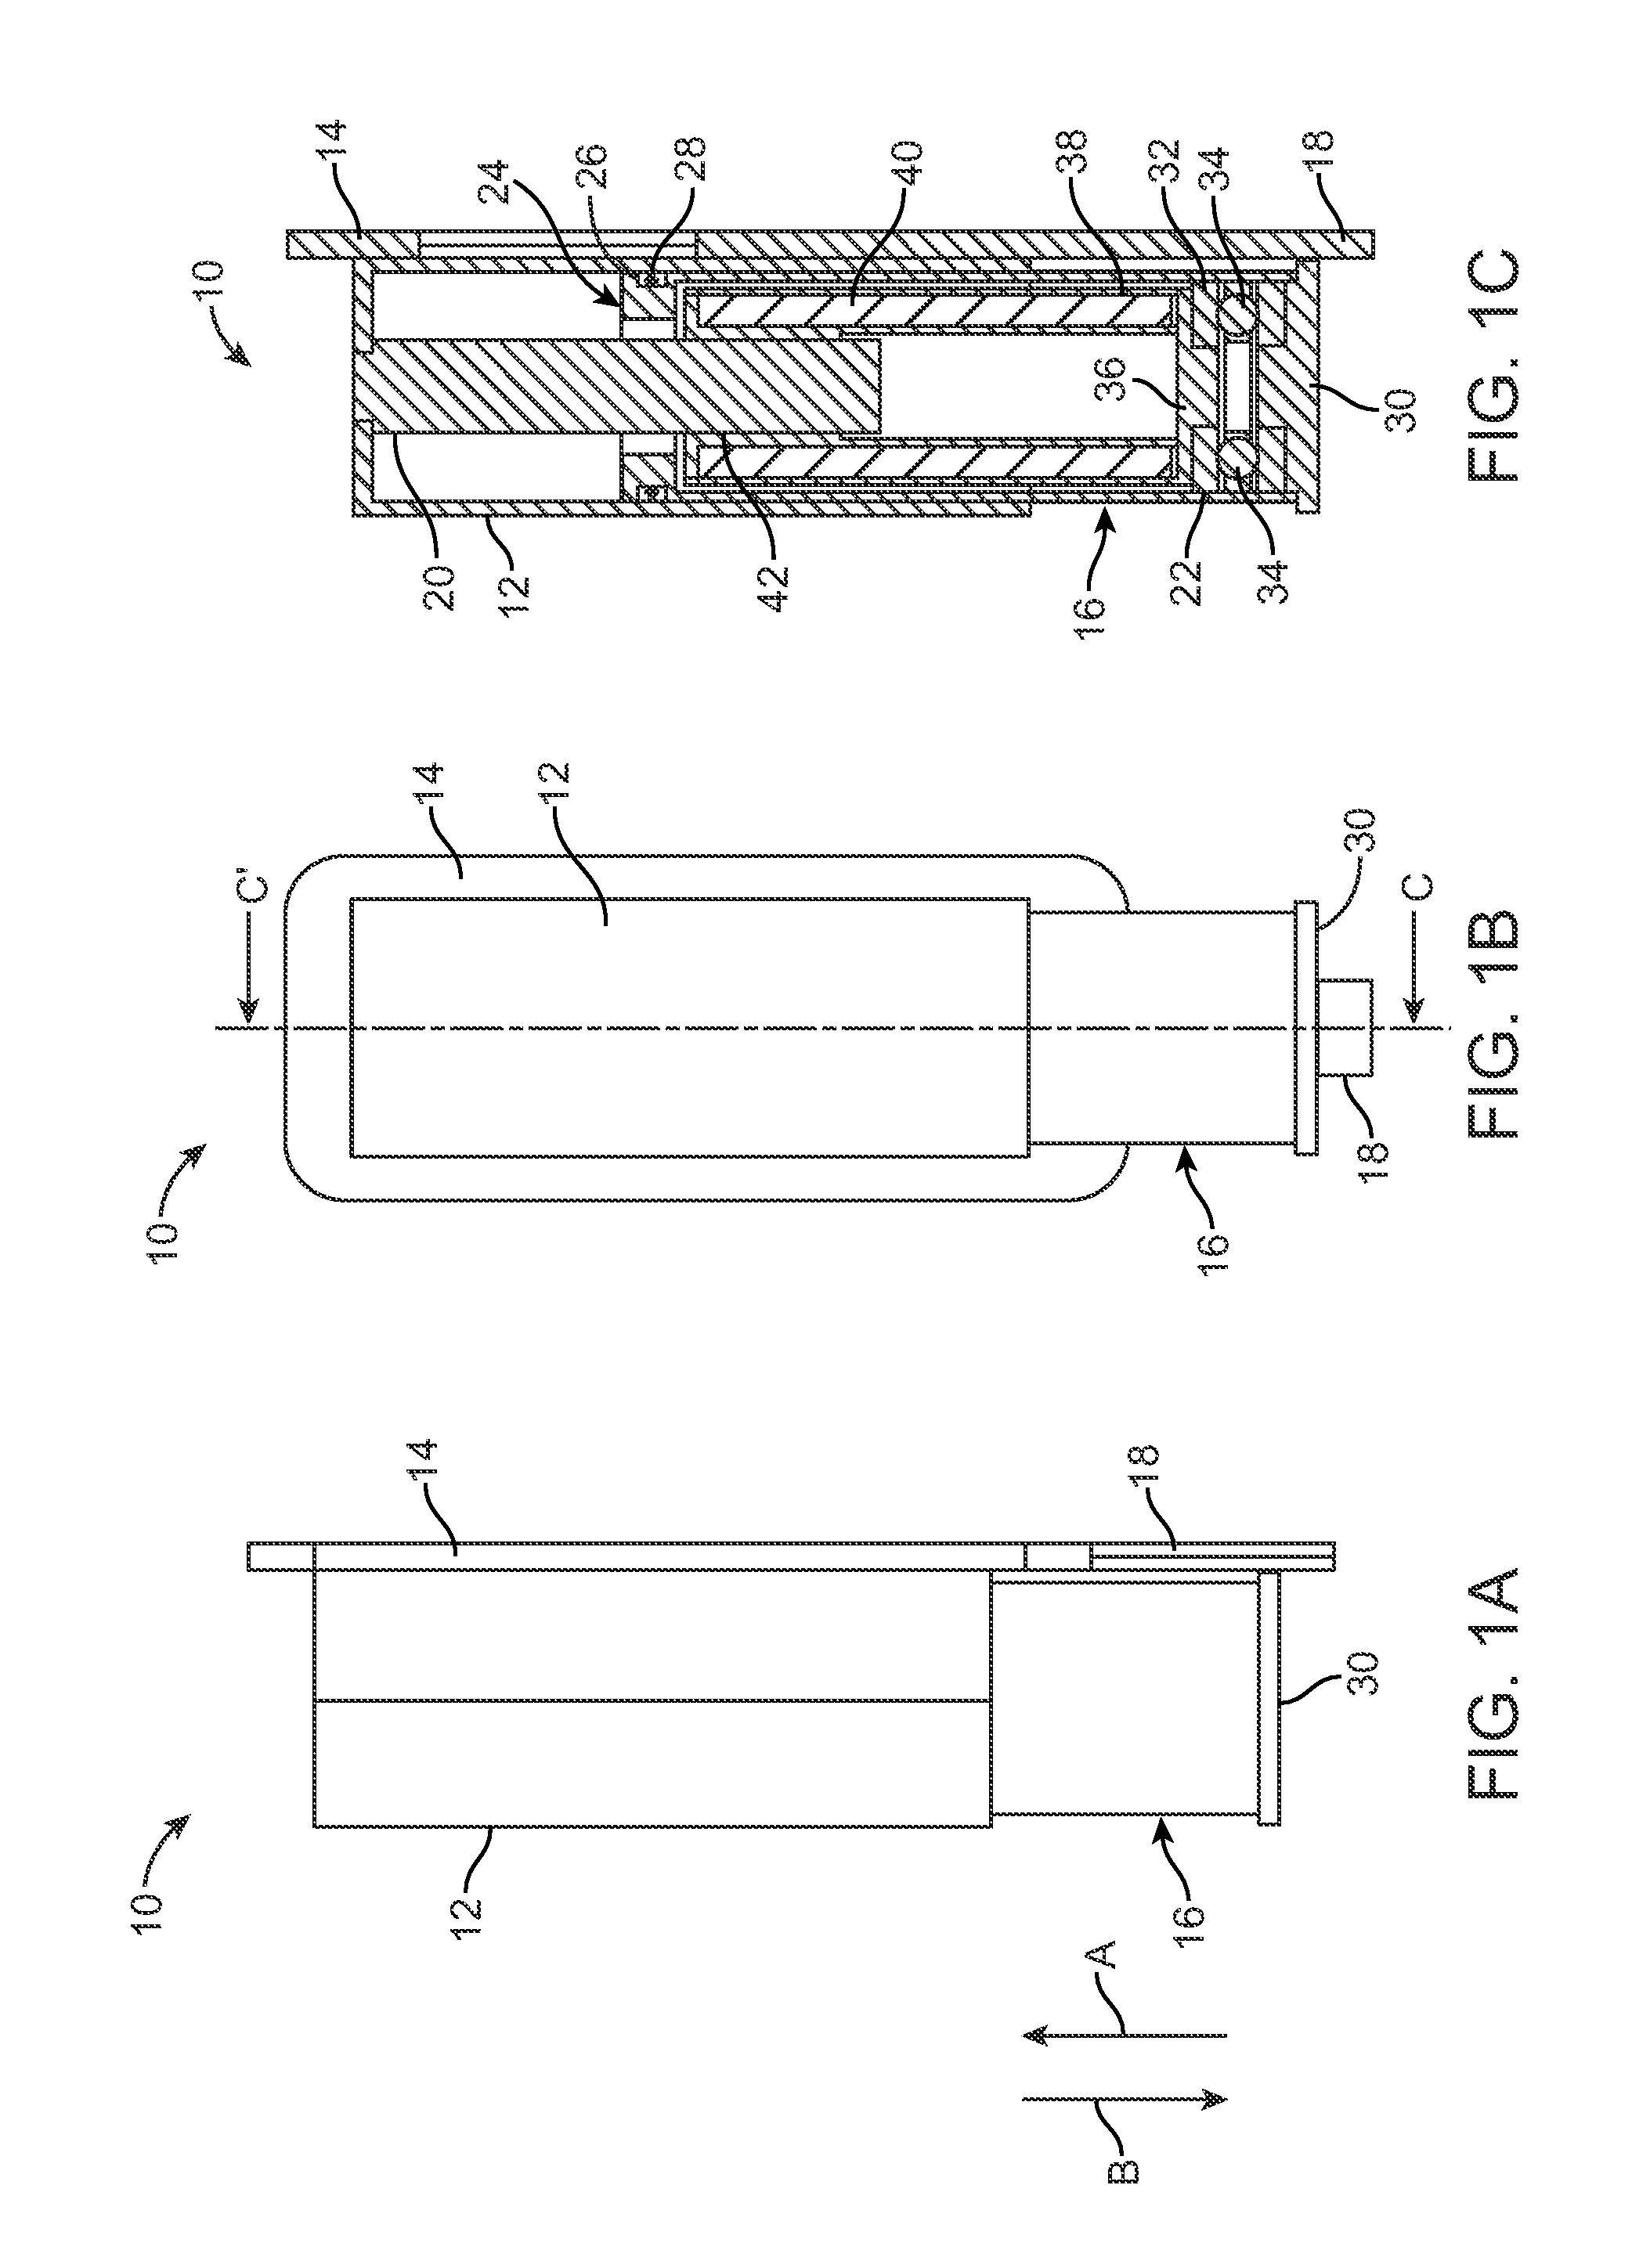 Interspinous process device and method